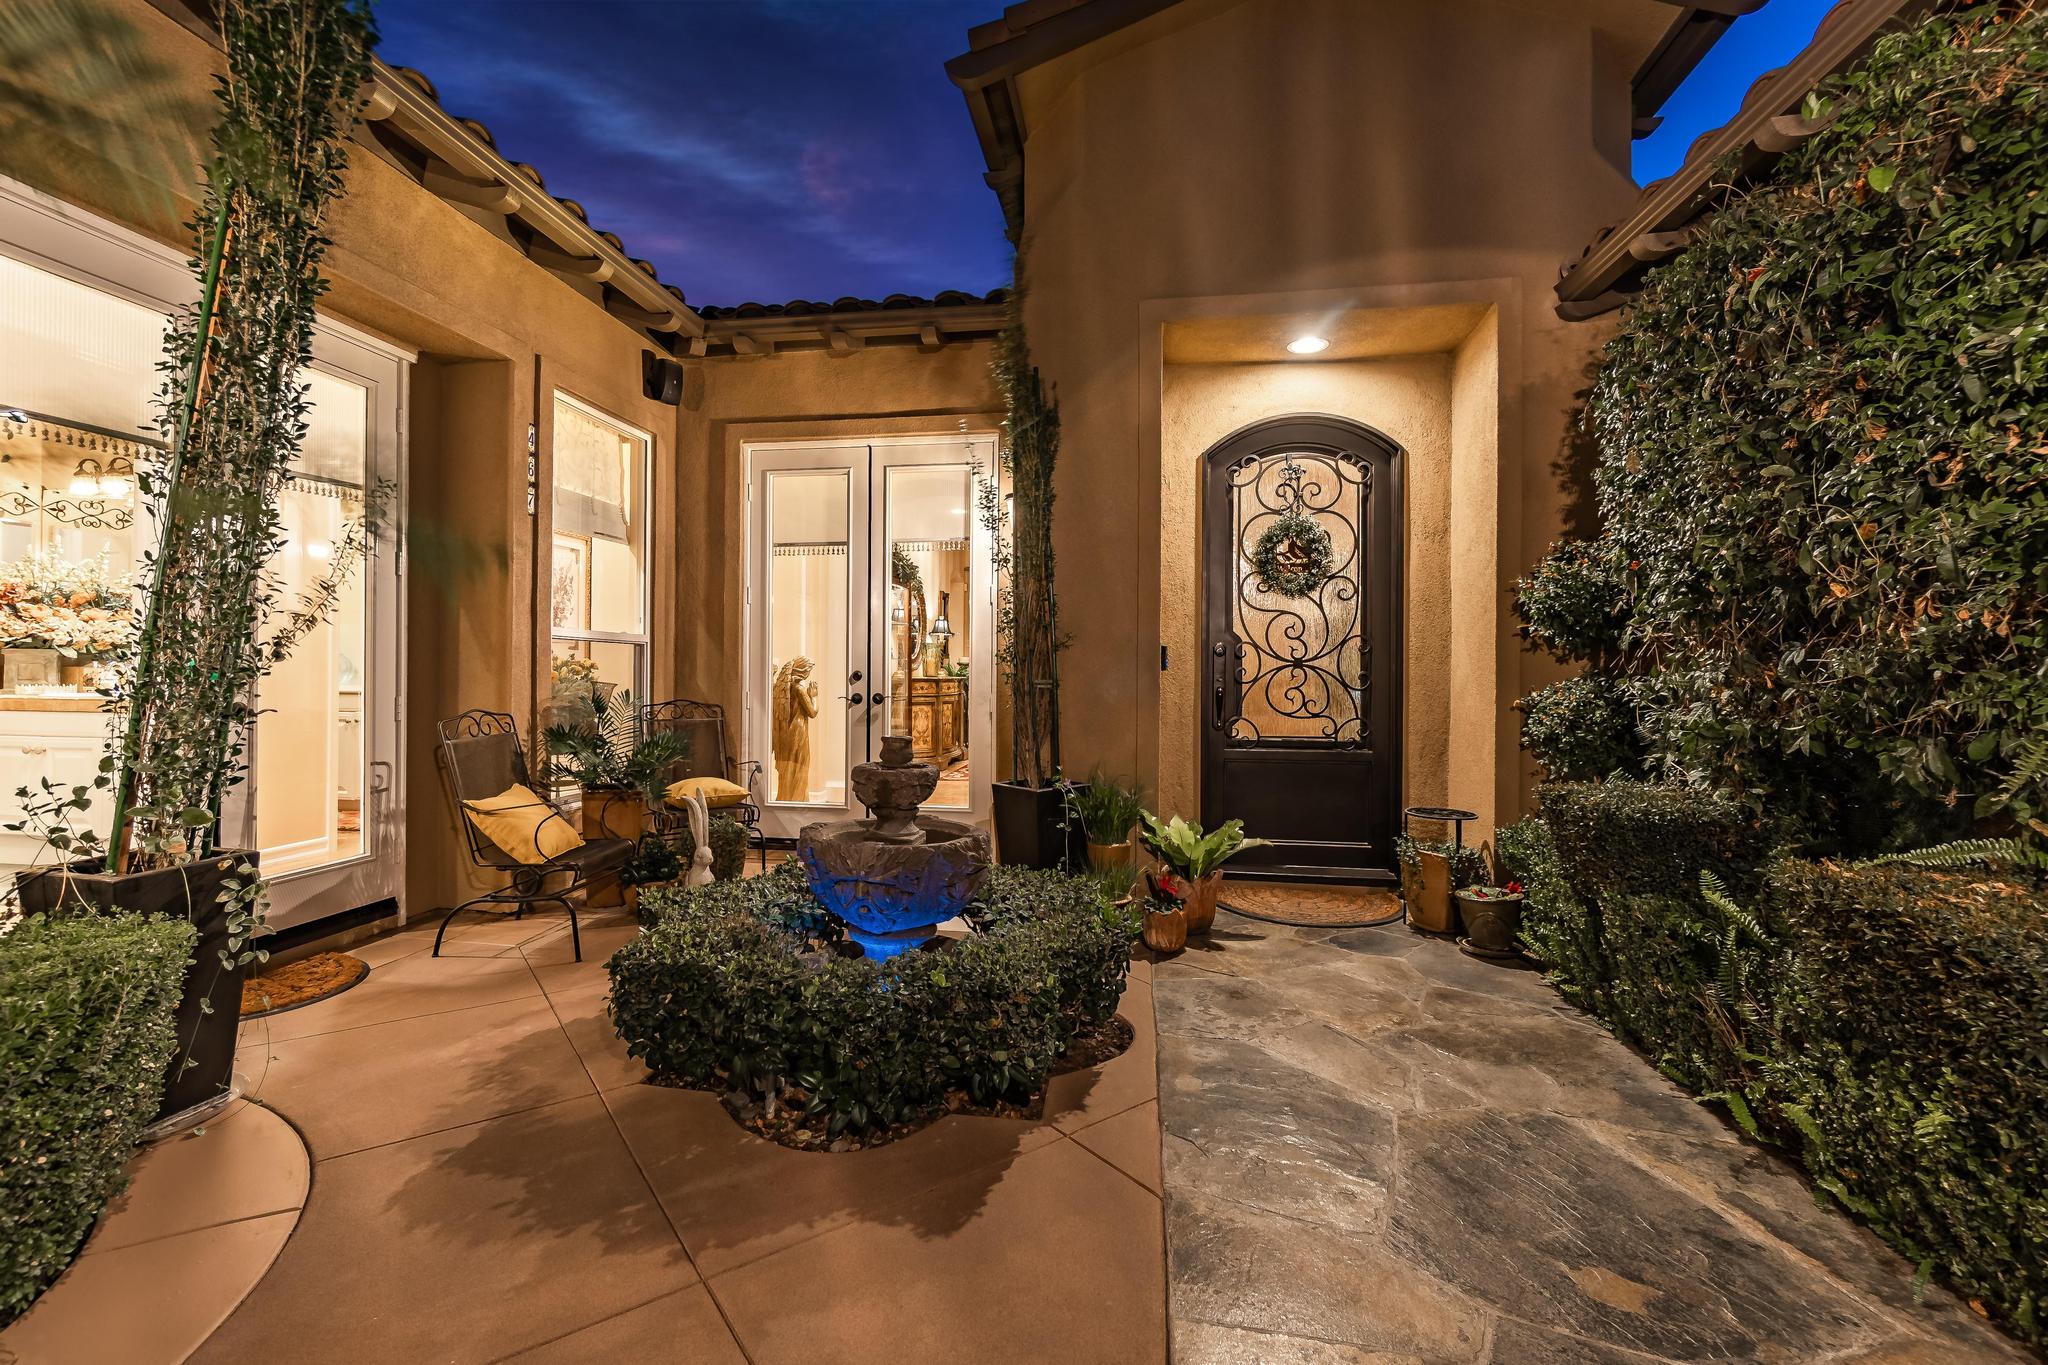 Tuscan-Inspired Olinda Ranch Villa – 467 Tangerine Place, Brea, CA 92823 - View of Walkway to Front Entrance, Fountain and Windows/French Doors